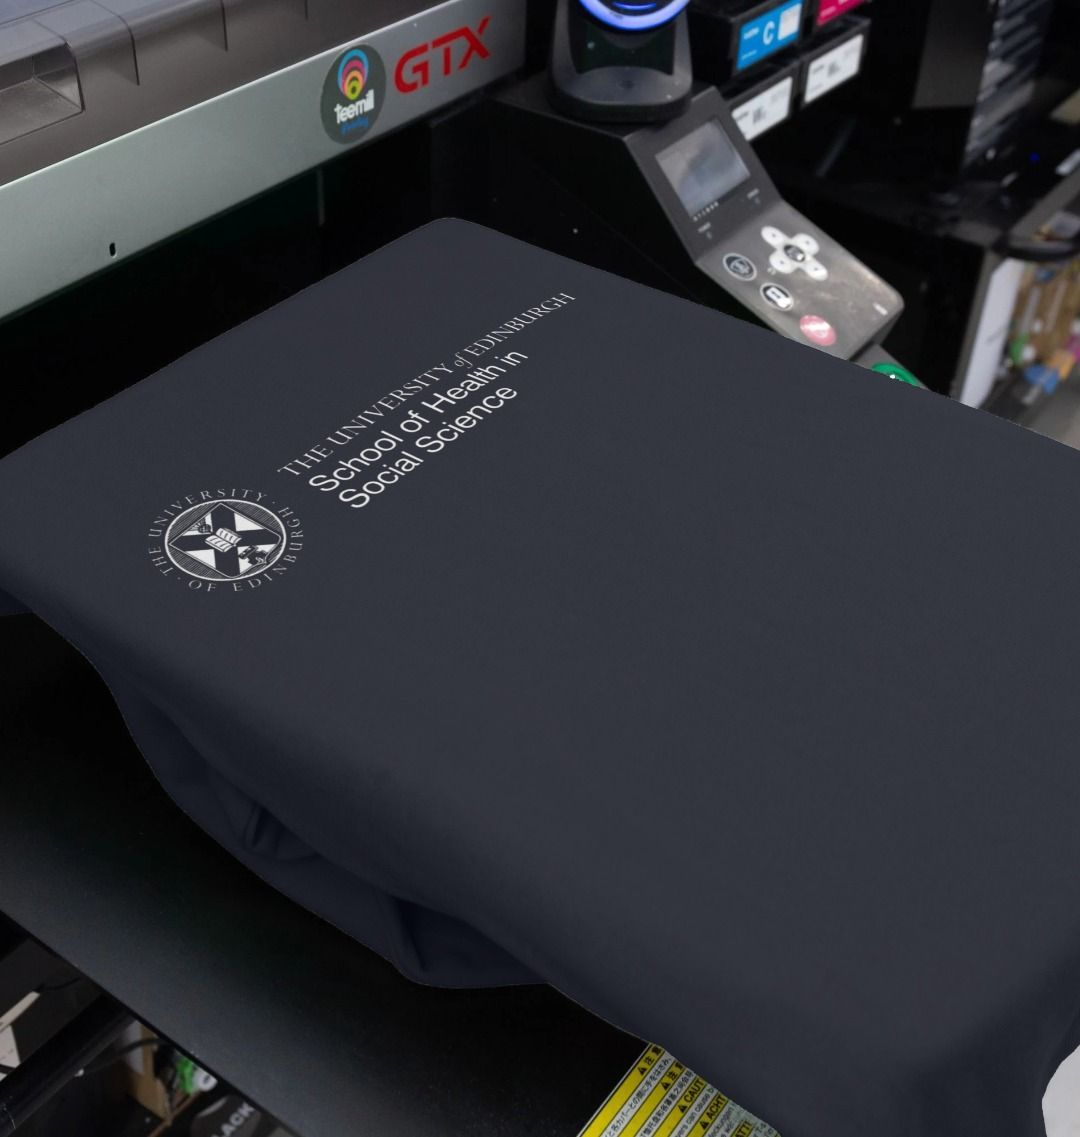 Our School of Health in Social Science Sweatshirt being printed by our print on demand partner, teemill.